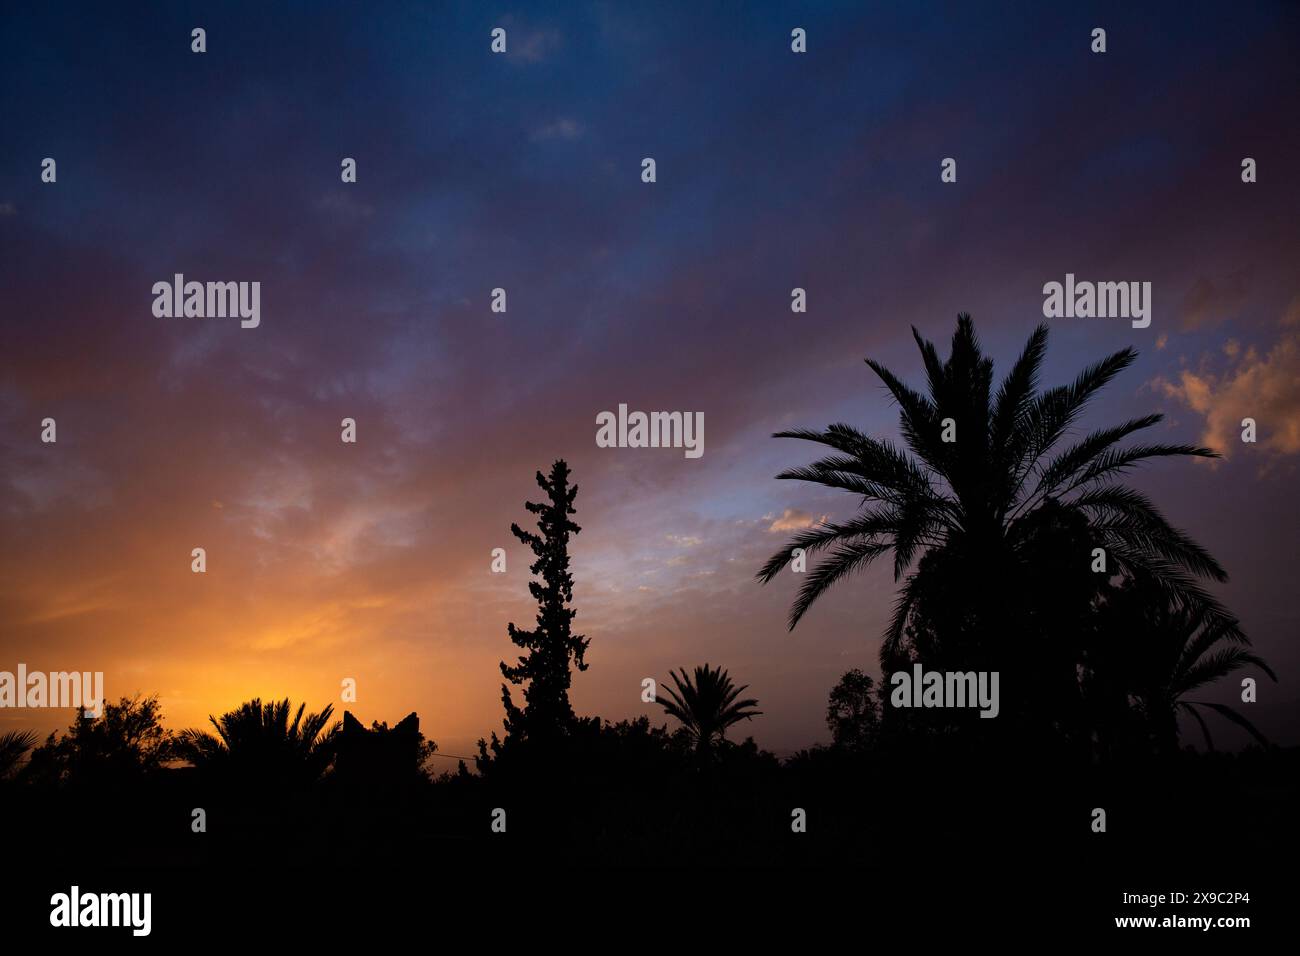 A palm oases or palmeraie in Skoura, Morocco at sunset from a garden balcony Stock Photo